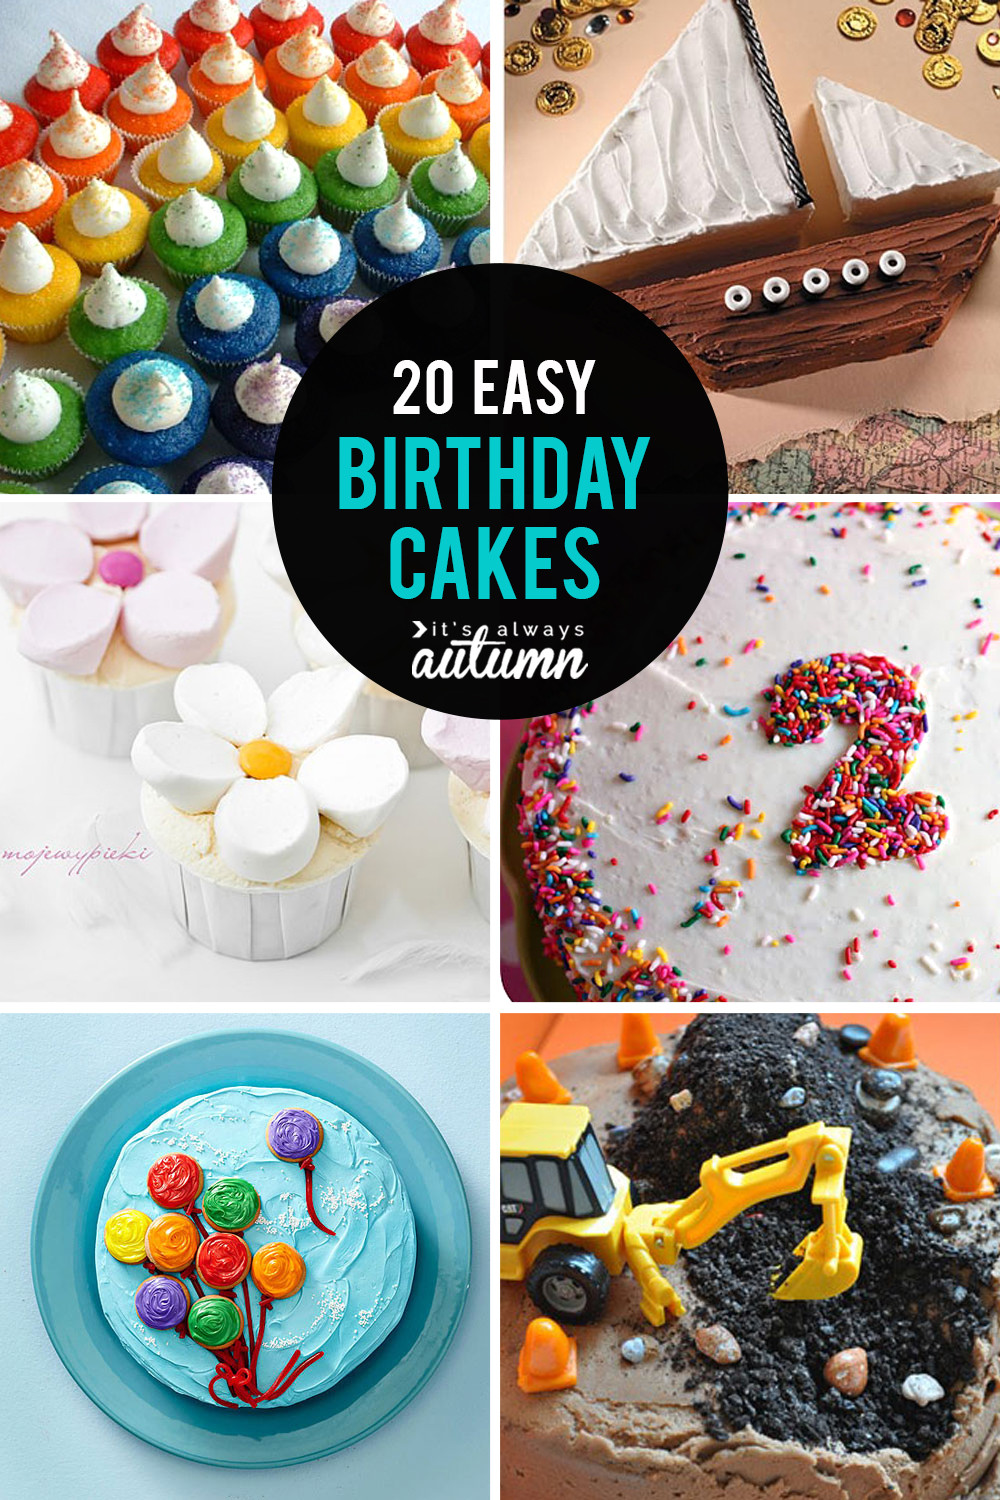 Simple Birthday Cake Decorating Ideas
 20 easy birthday cakes that anyone can decorate It s